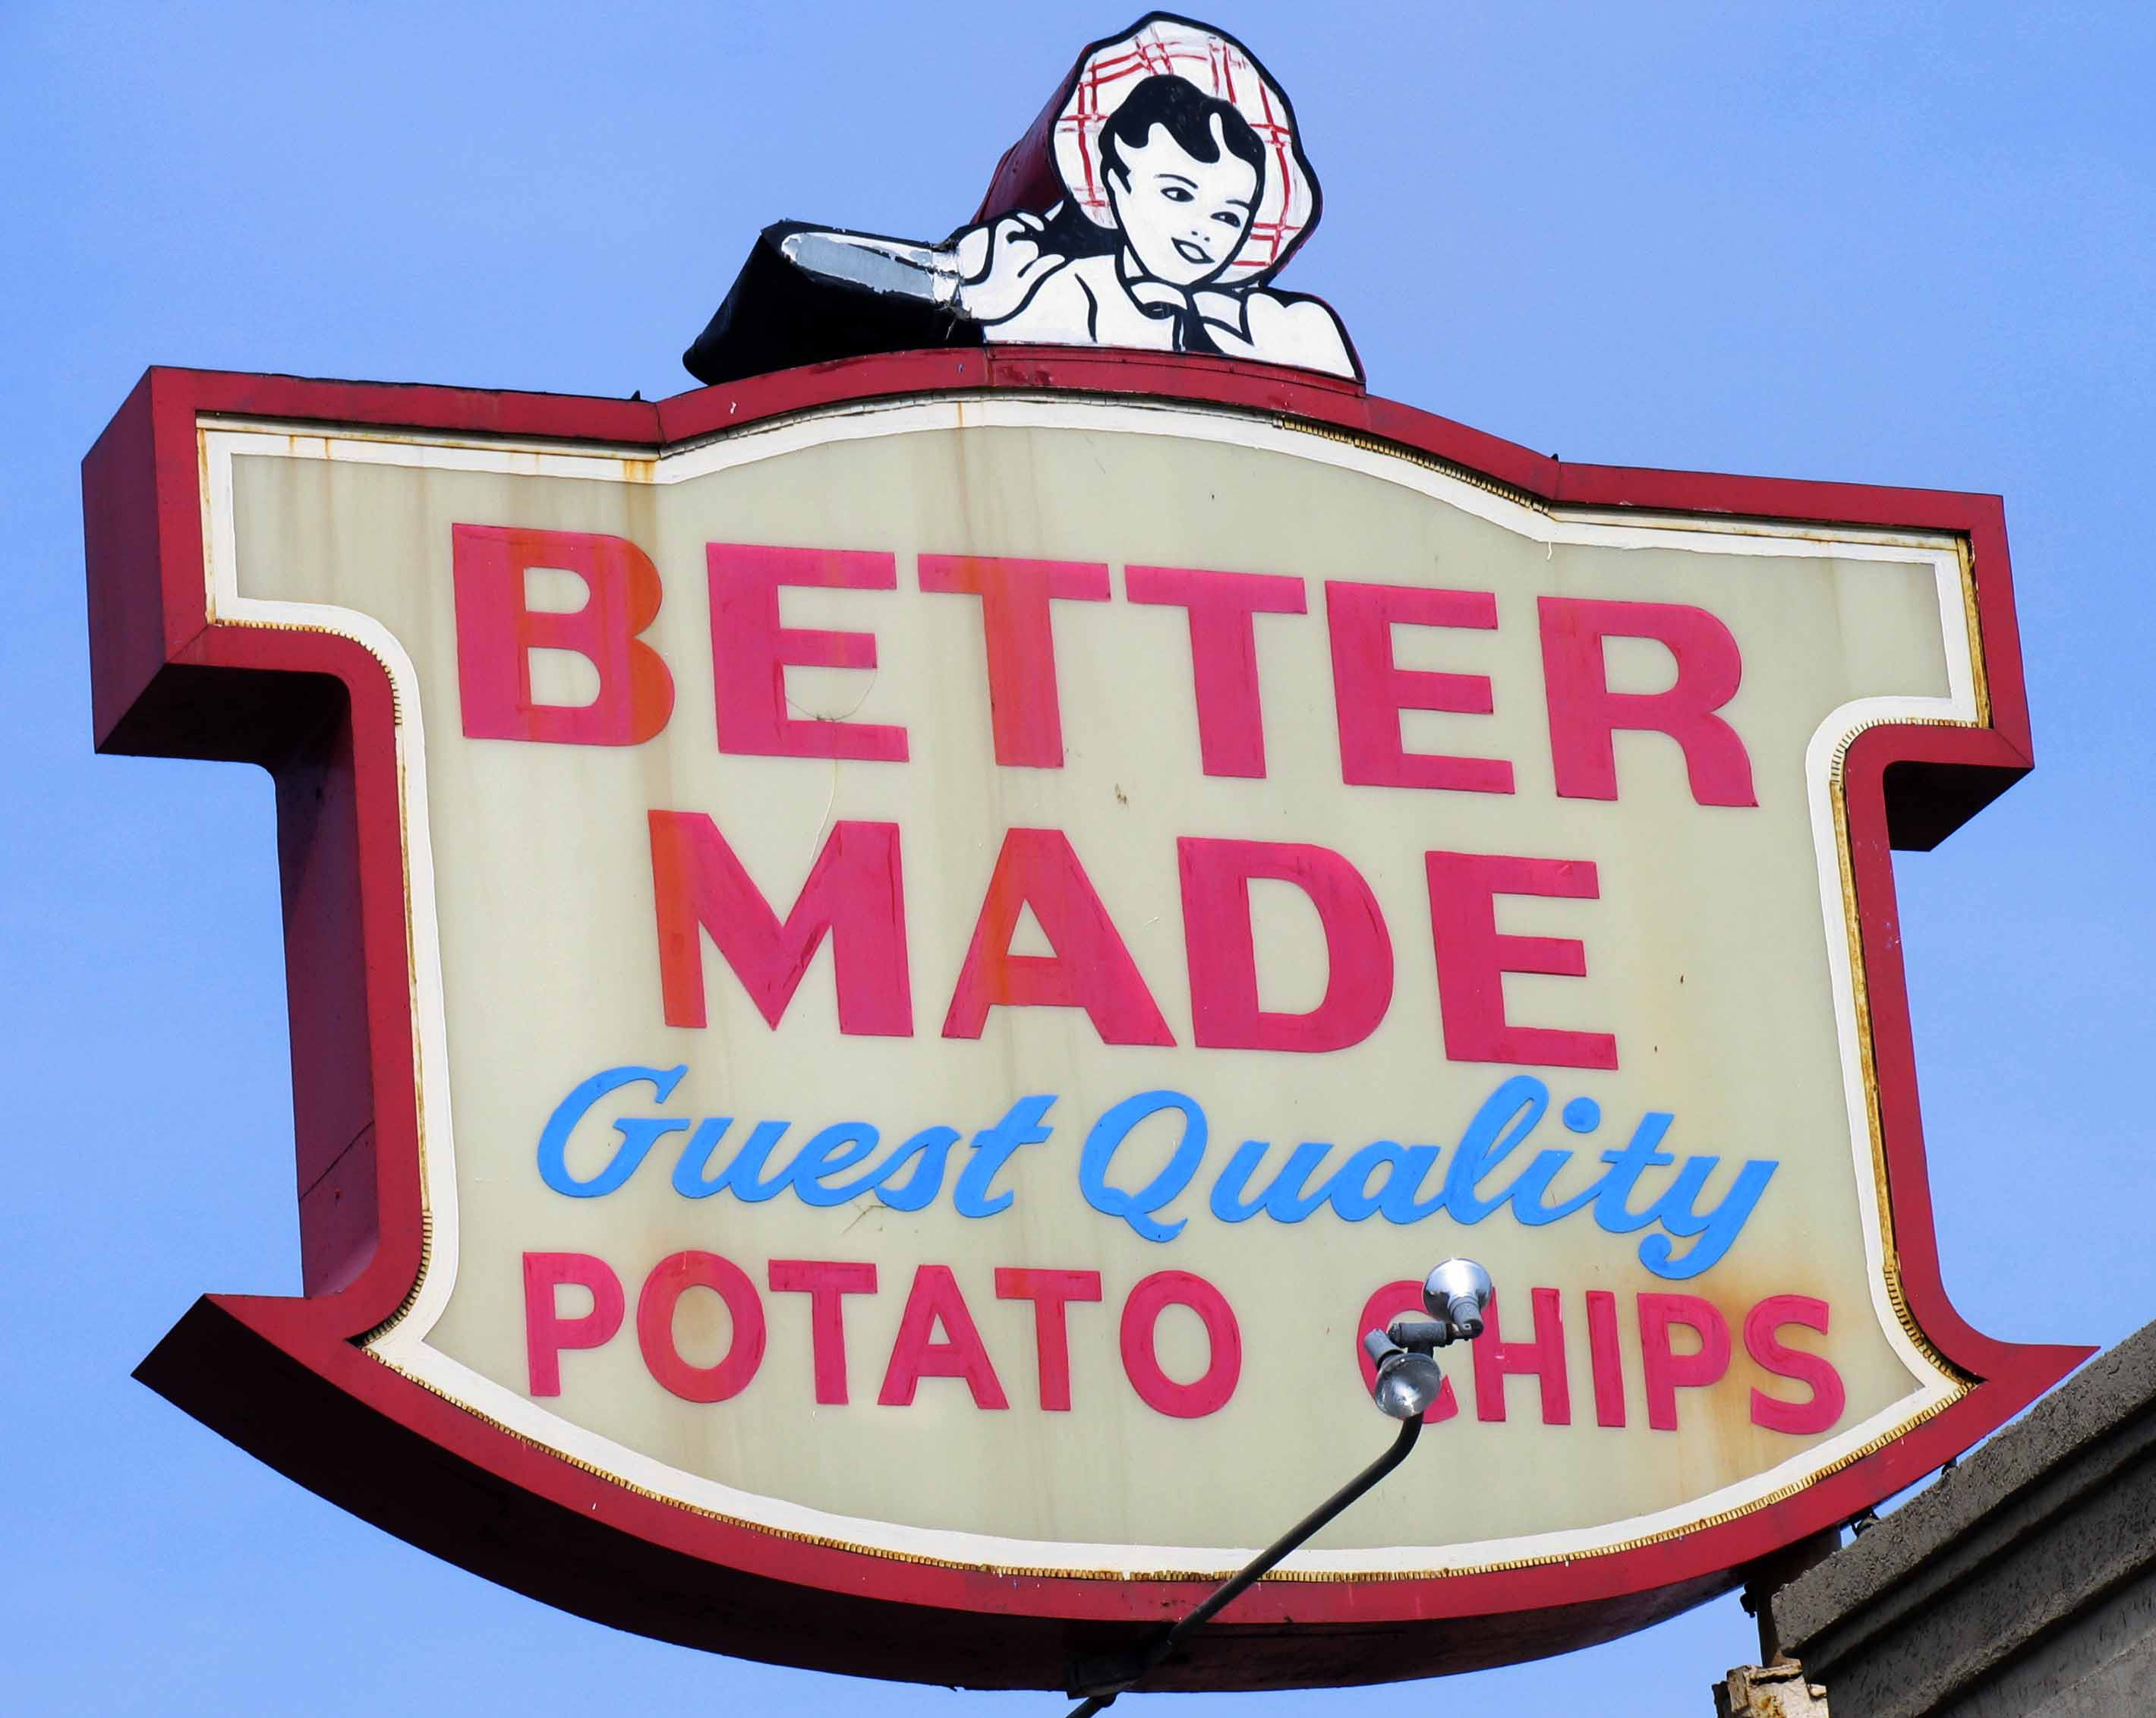 Better Made Potato Chips
 Everyday is Potato Chip Day